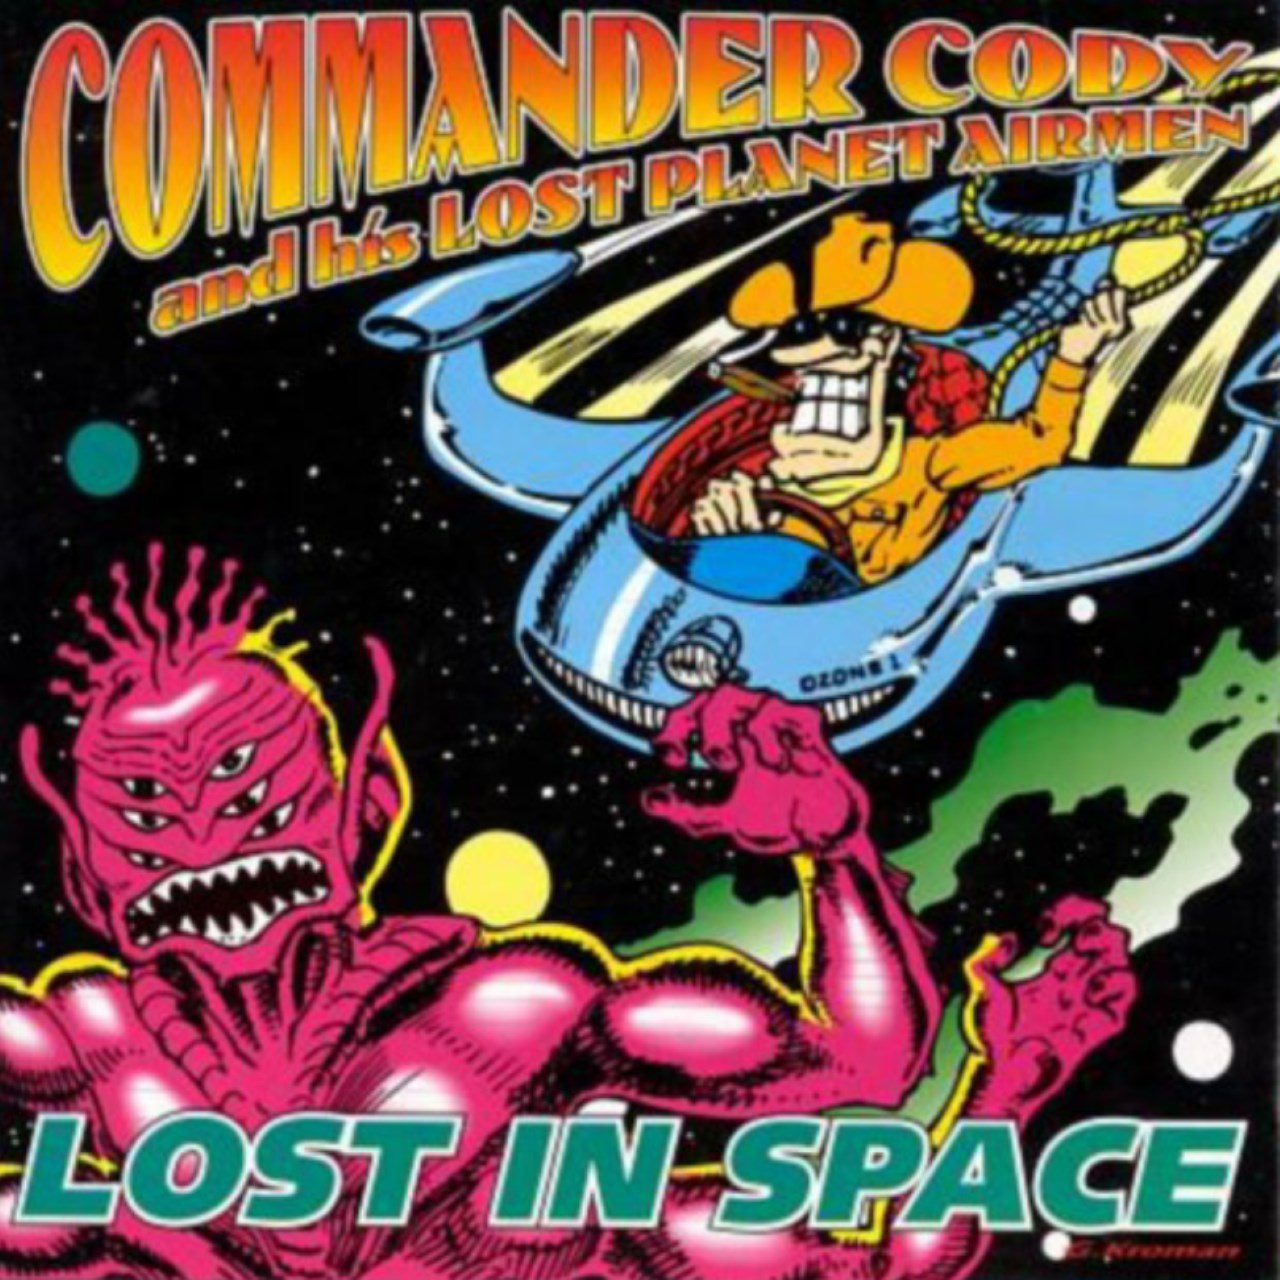 Commander Cody And His Lost Planet Airmen– Lost In Space cober album